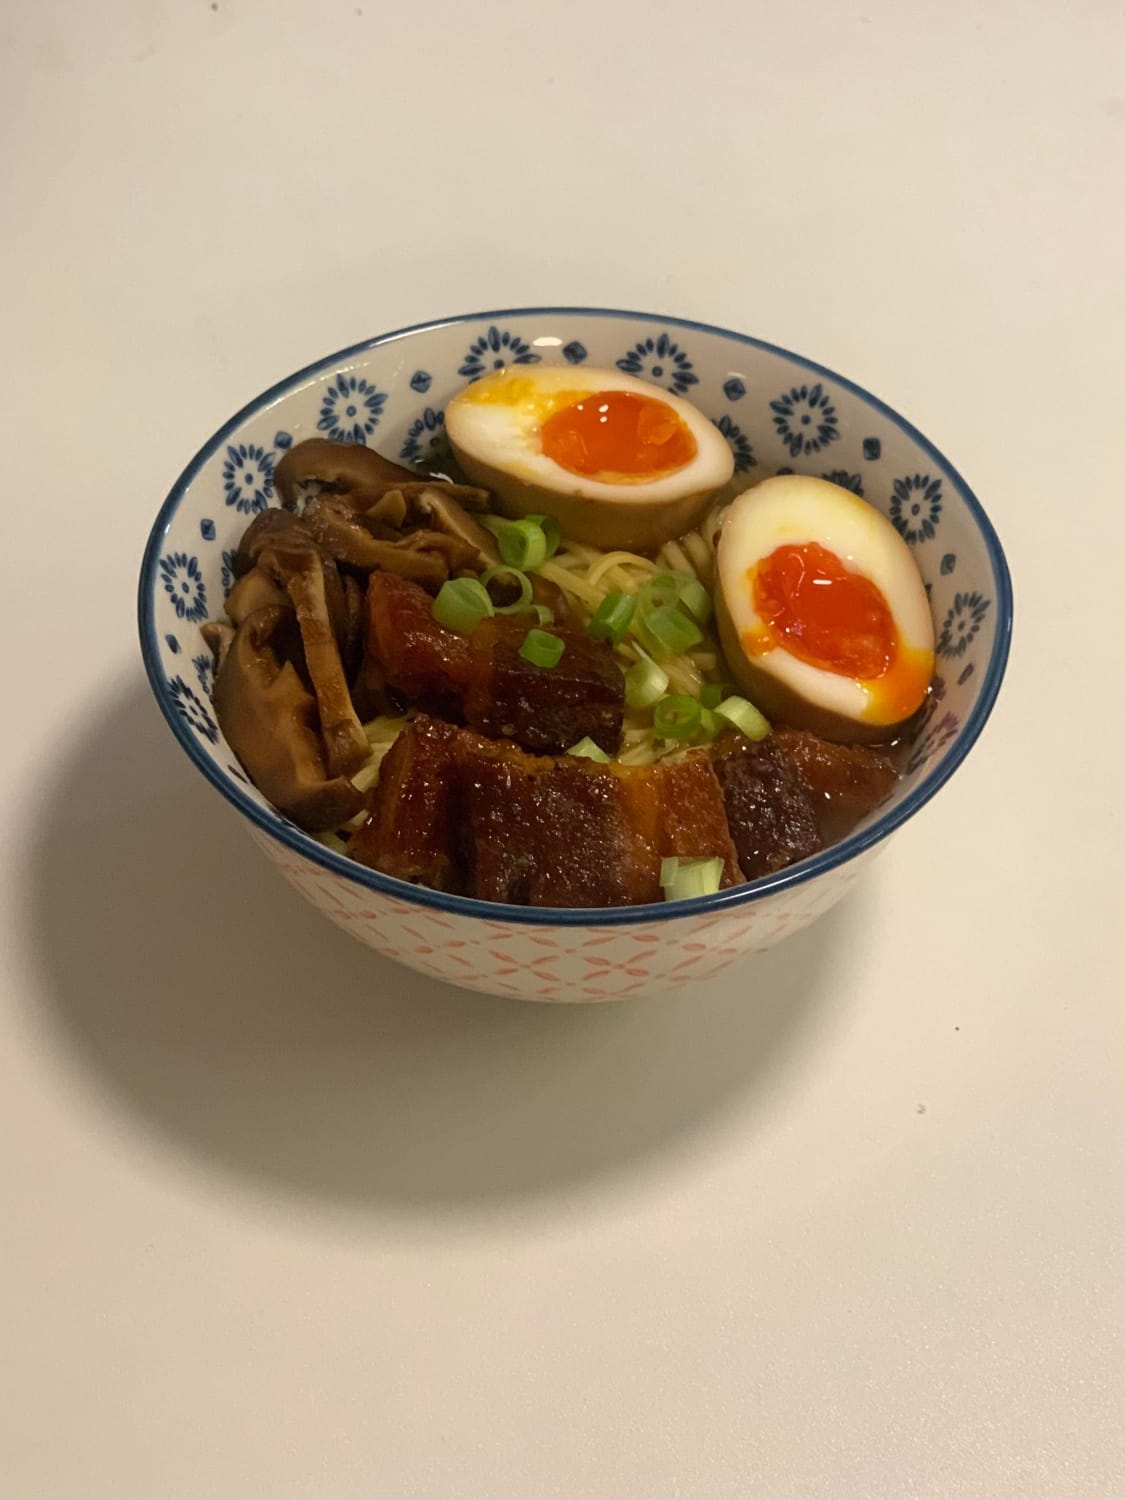 Ramen I made for dinner with home pickled Shiitake mushrooms, 7 hour Soy eggs and vegan pork belly. I forgot the edamame beans though